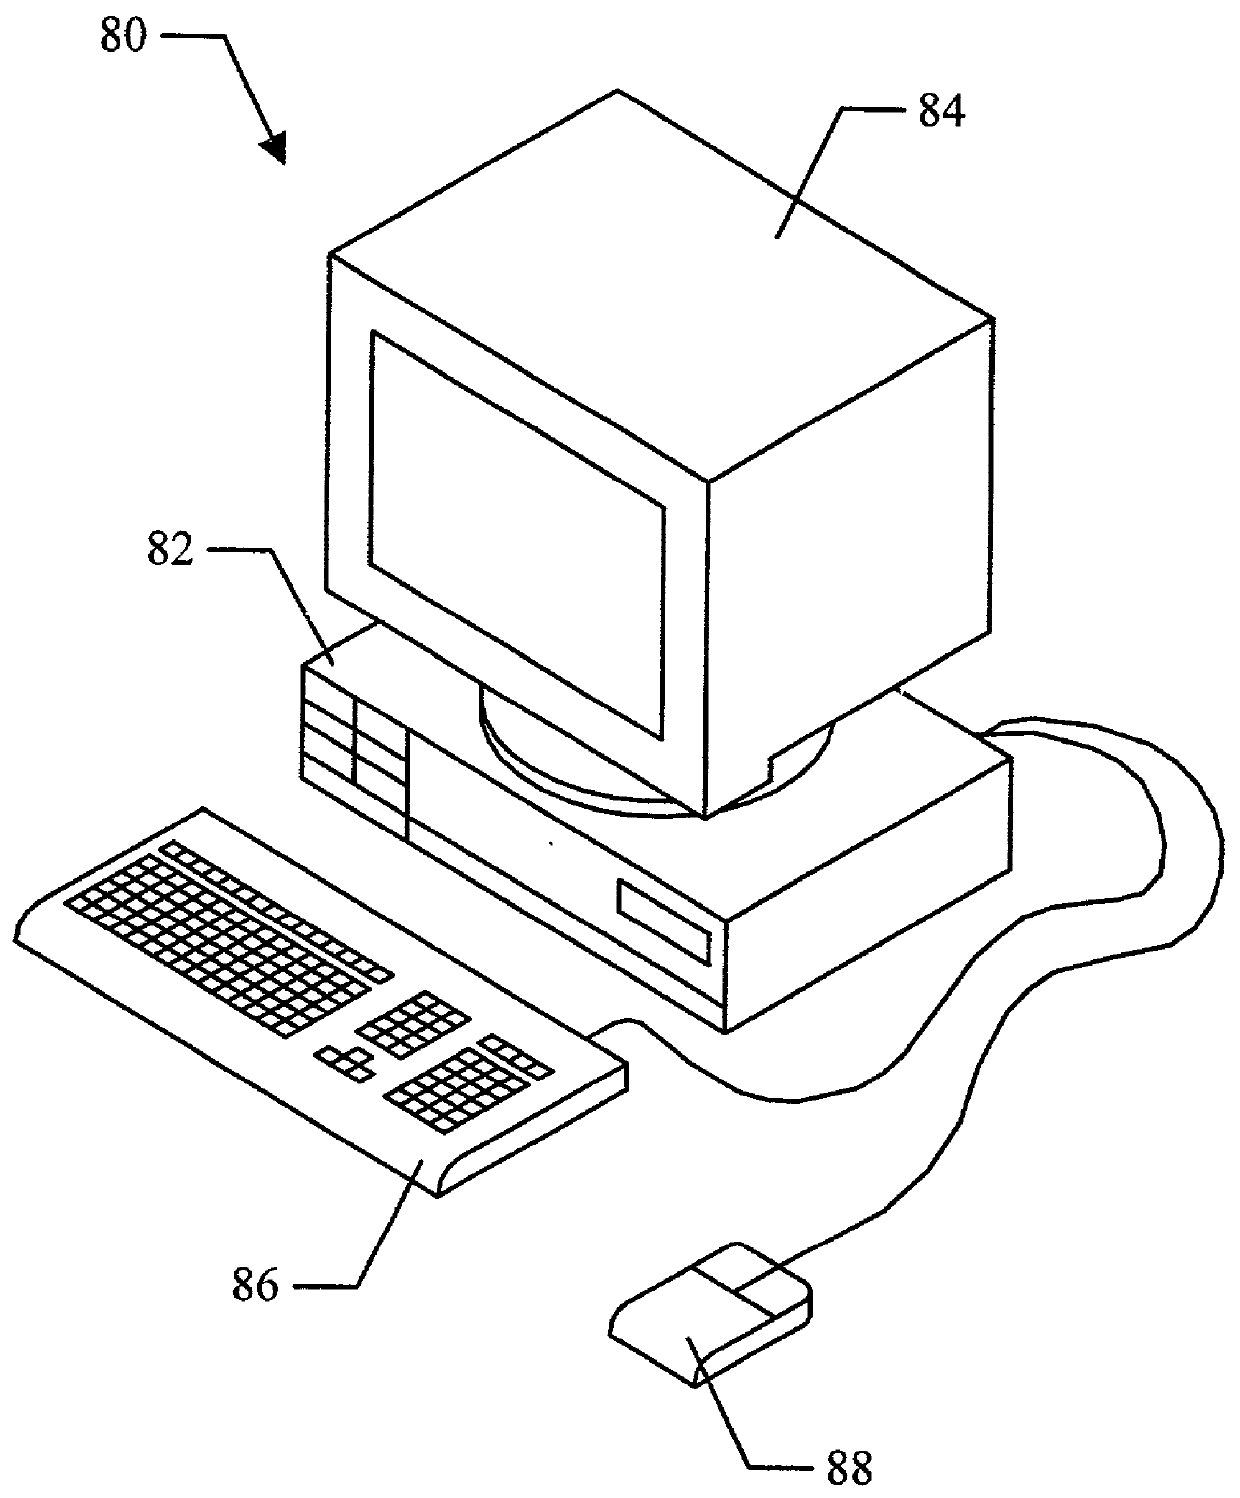 Graphics system configured to filter samples using a variable support filter